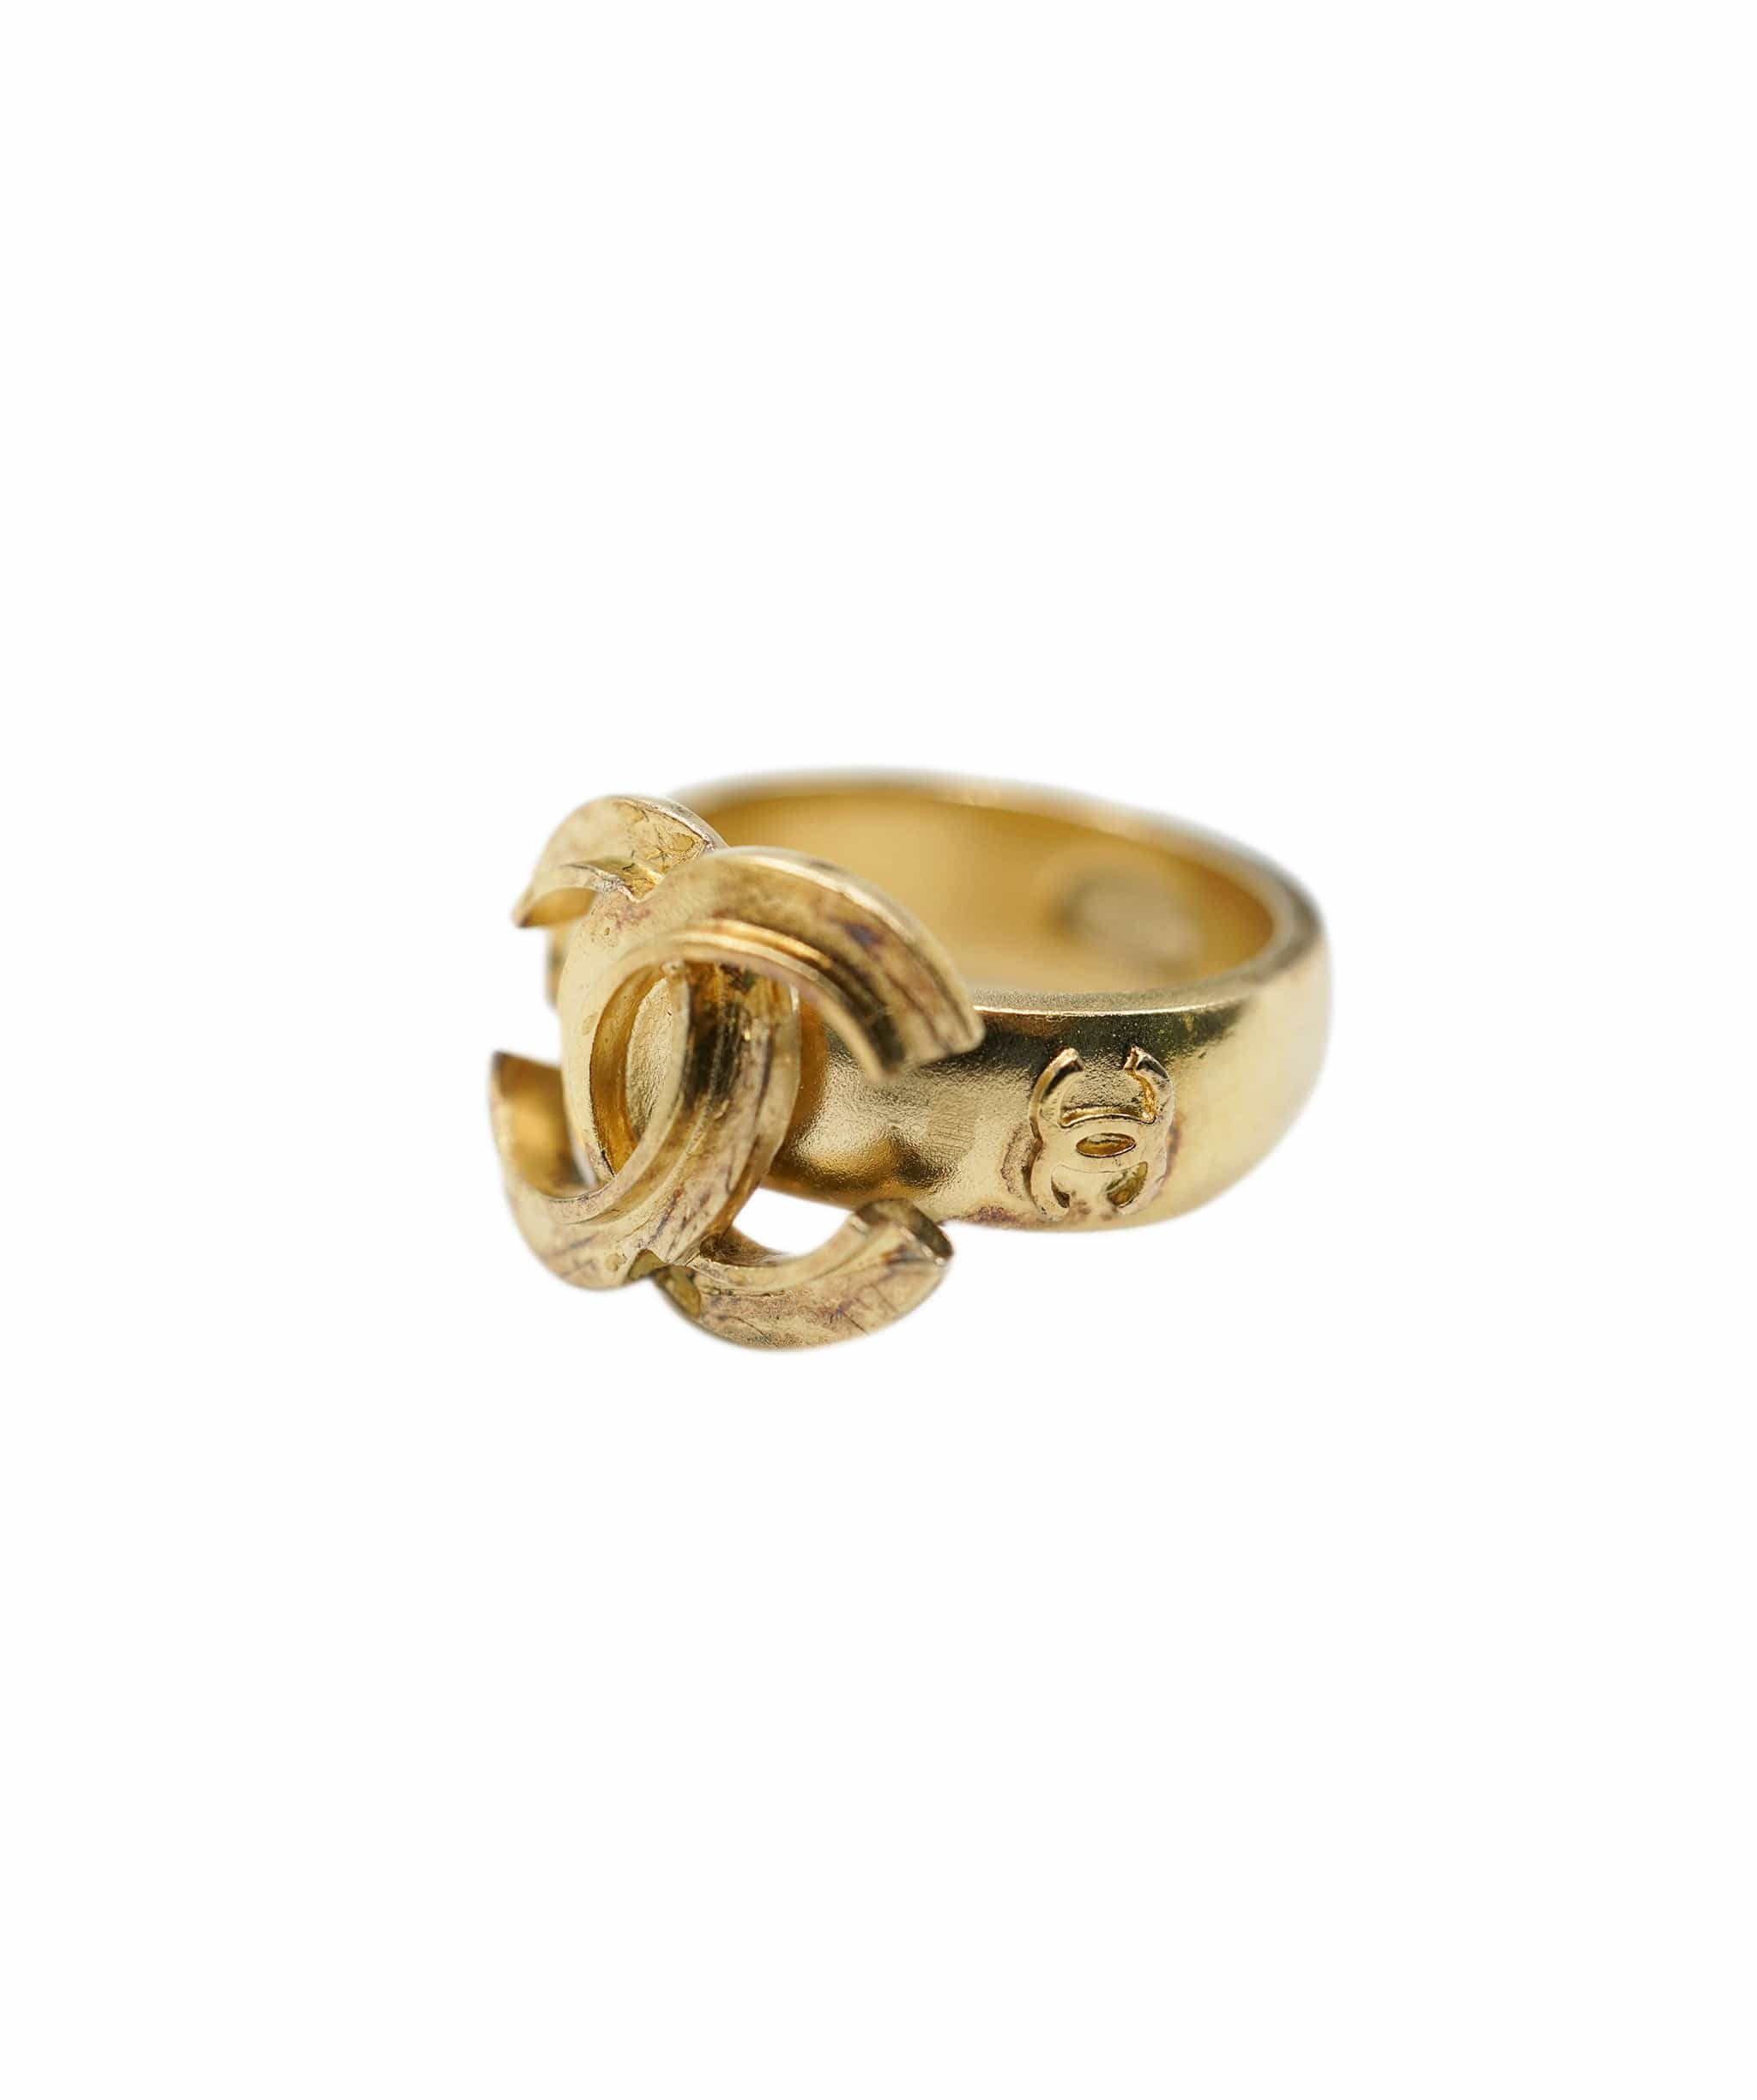 Chanel CHANEL CC SOLITARE STYLE RING UKL1405